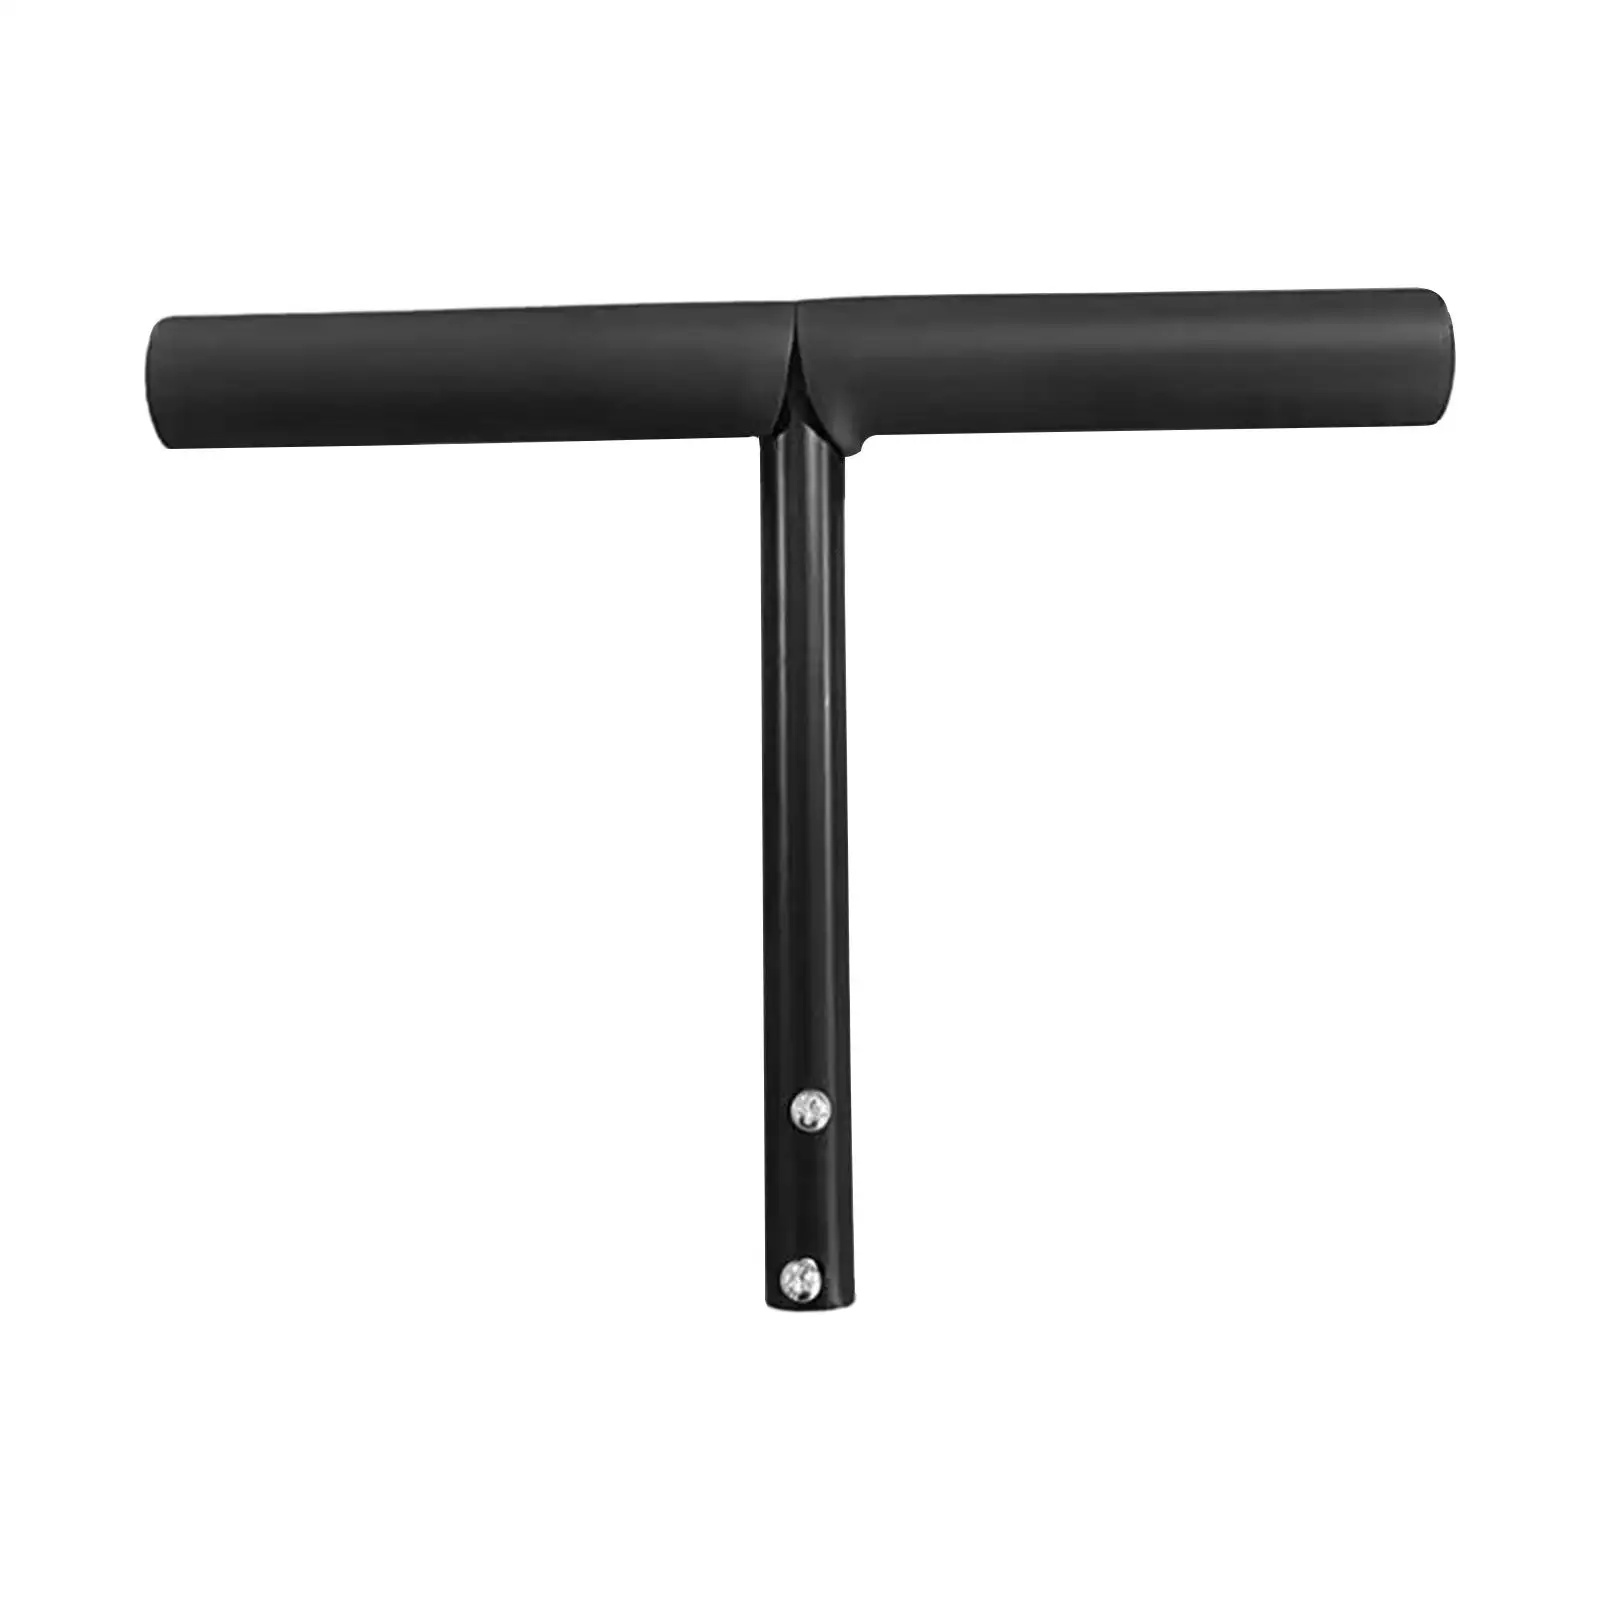 T Shaped Push Handle Bar Kids Tricycle Accessories Practical Easy to Install Sturdy Replacement Durable for Travel Outdoor Home